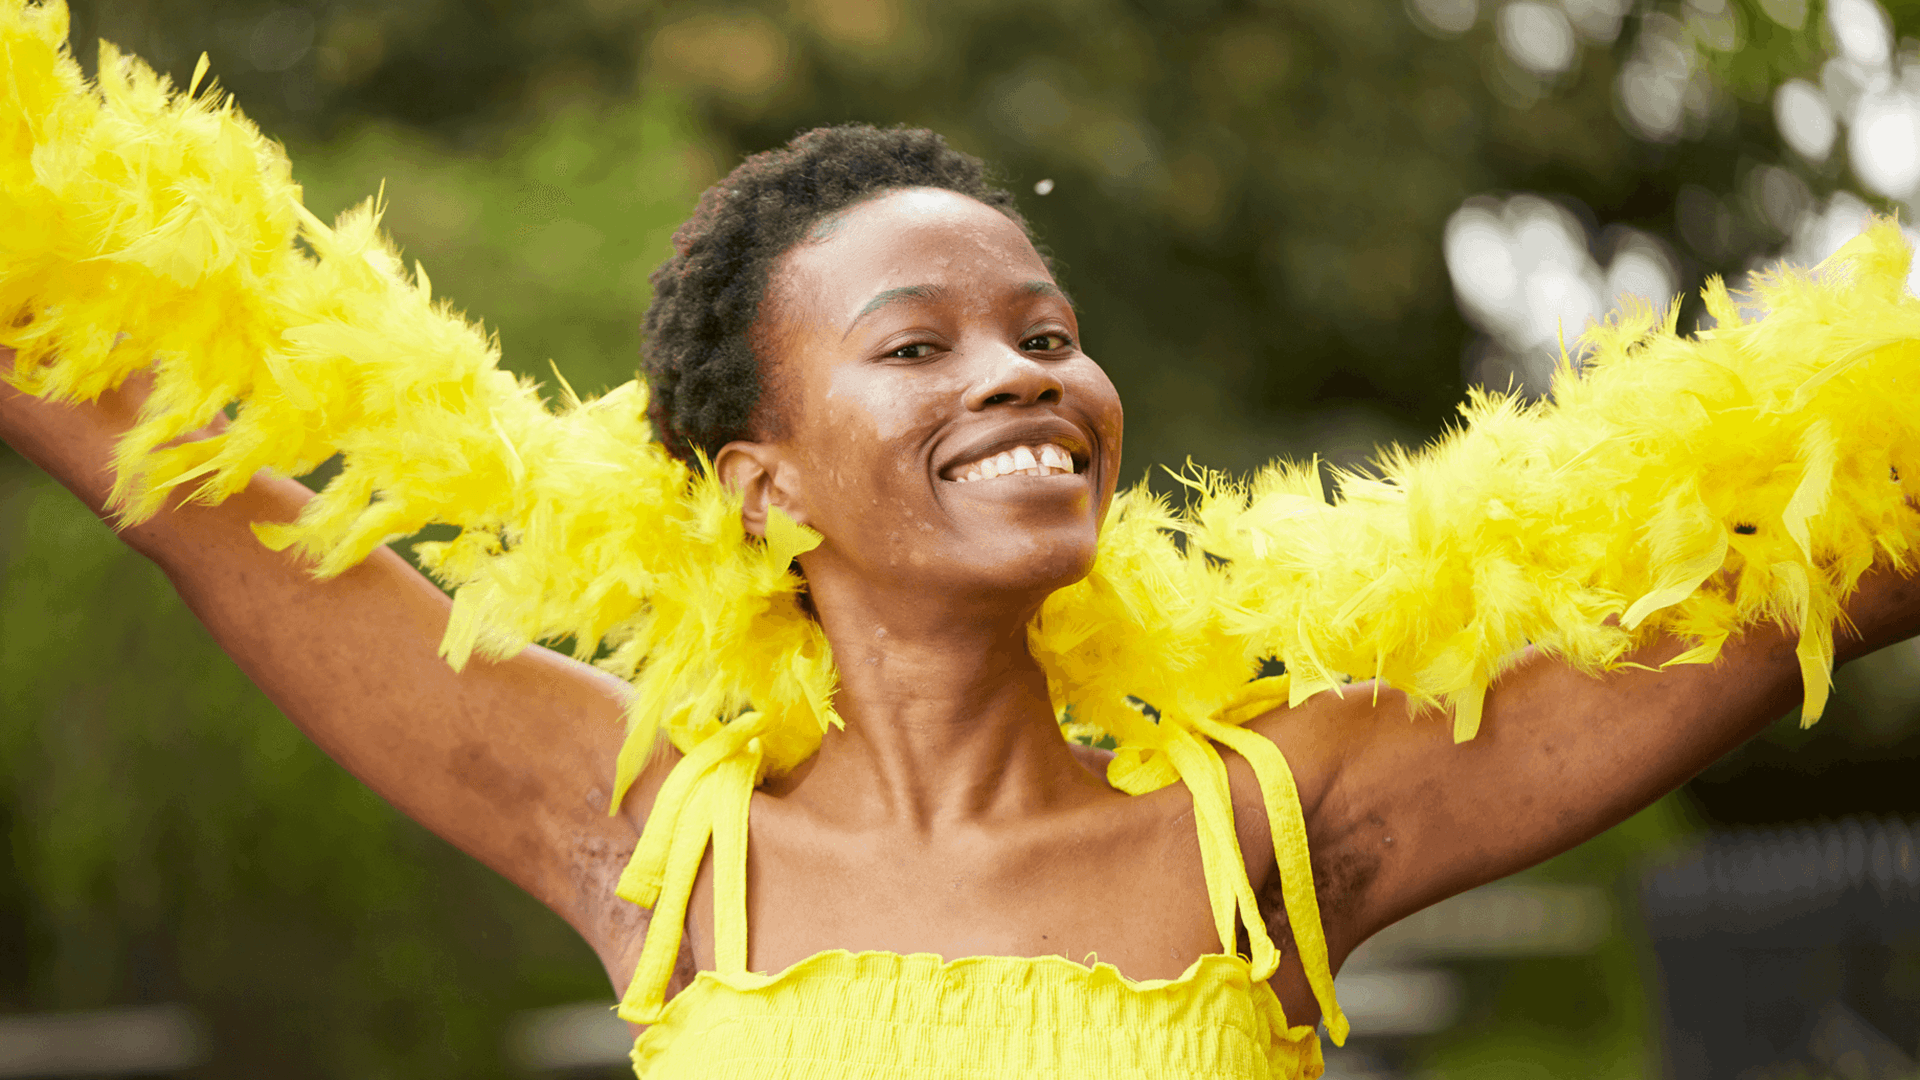 medium shot of a fundraising ambassador wearing yellow dress and yellow feather scarf smiling at the camera